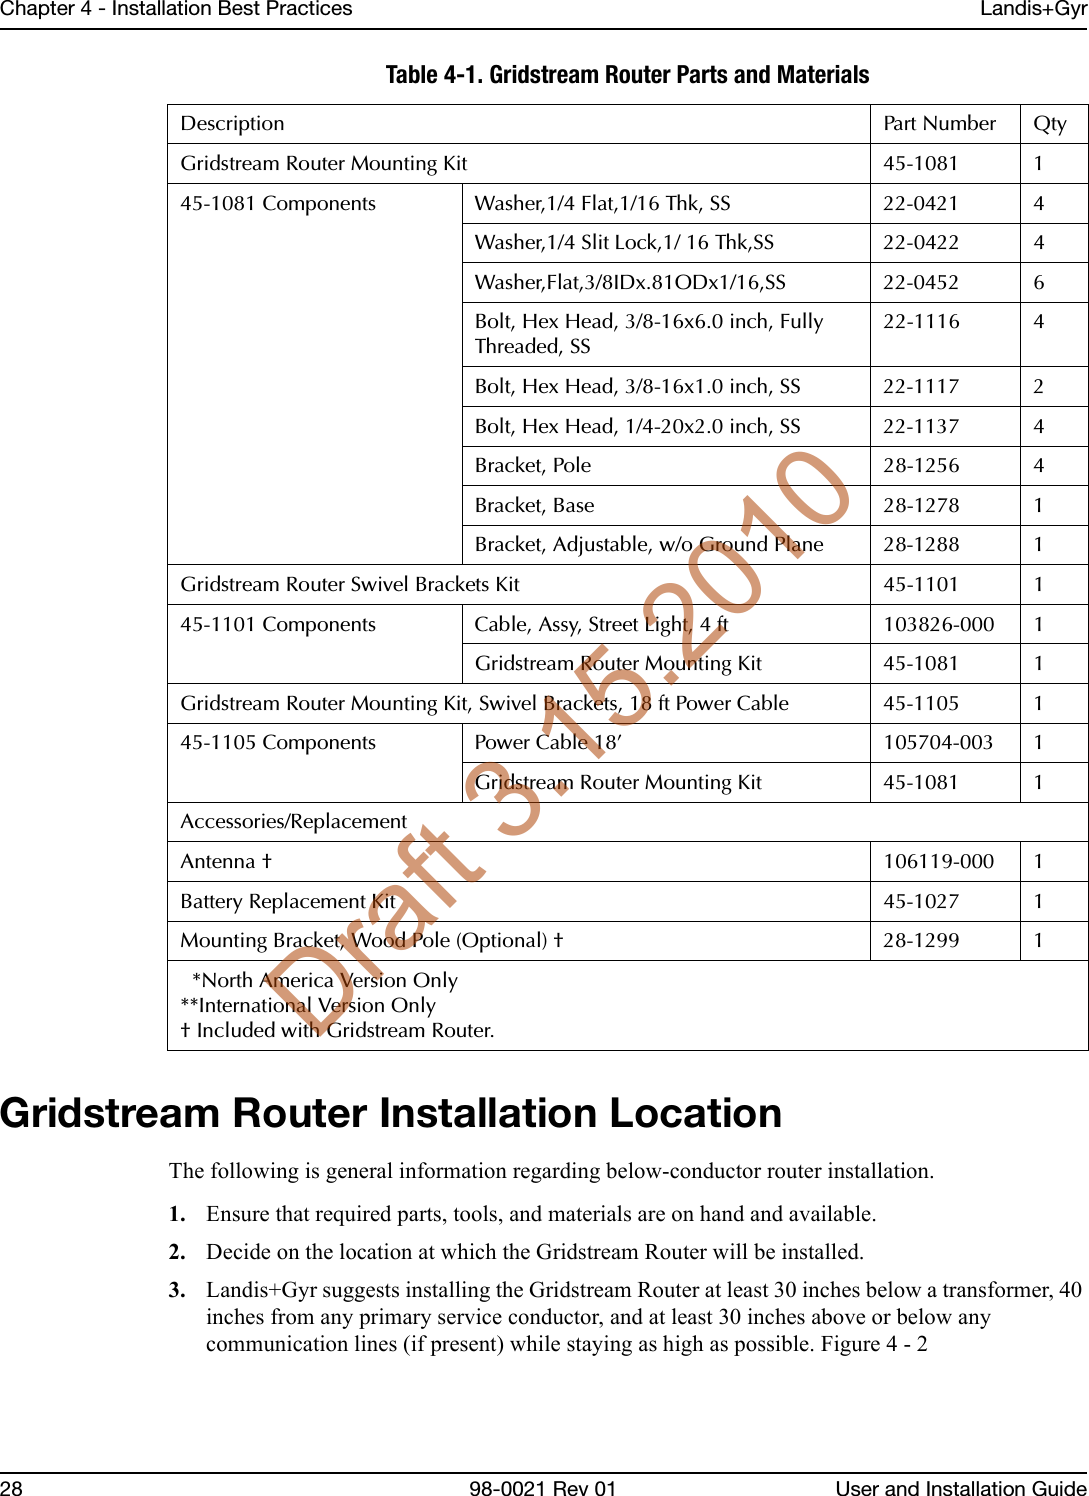 Chapter 4 - Installation Best Practices Landis+Gyr28 98-0021 Rev 01 User and Installation GuideGridstream Router Installation LocationThe following is general information regarding below-conductor router installation. 1. Ensure that required parts, tools, and materials are on hand and available.2. Decide on the location at which the Gridstream Router will be installed.3. Landis+Gyr suggests installing the Gridstream Router at least 30 inches below a transformer, 40 inches from any primary service conductor, and at least 30 inches above or below any communication lines (if present) while staying as high as possible. Figure 4 - 2Gridstream Router Mounting Kit 45-1081 145-1081 Components Washer,1/4 Flat,1/16 Thk, SS 22-0421 4Washer,1/4 Slit Lock,1/ 16 Thk,SS 22-0422 4Washer,Flat,3/8IDx.81ODx1/16,SS 22-0452 6Bolt, Hex Head, 3/8-16x6.0 inch, Fully Threaded, SS22-1116 4Bolt, Hex Head, 3/8-16x1.0 inch, SS 22-1117 2Bolt, Hex Head, 1/4-20x2.0 inch, SS 22-1137 4Bracket, Pole 28-1256 4Bracket, Base 28-1278 1Bracket, Adjustable, w/o Ground Plane 28-1288 1Gridstream Router Swivel Brackets Kit 45-1101 145-1101 Components Cable, Assy, Street Light, 4 ft 103826-000 1Gridstream Router Mounting Kit 45-1081 1Gridstream Router Mounting Kit, Swivel Brackets, 18 ft Power Cable 45-1105 145-1105 Components Power Cable 18’ 105704-003 1Gridstream Router Mounting Kit 45-1081 1Accessories/ReplacementAntenna † 106119-000 1Battery Replacement Kit 45-1027 1Mounting Bracket, Wood Pole (Optional) † 28-1299 1Table 4-1. Gridstream Router Parts and MaterialsDescription Part Number Qty  *North America Version Only**International Version Only† Included with Gridstream Router.Draft 3.15.2010